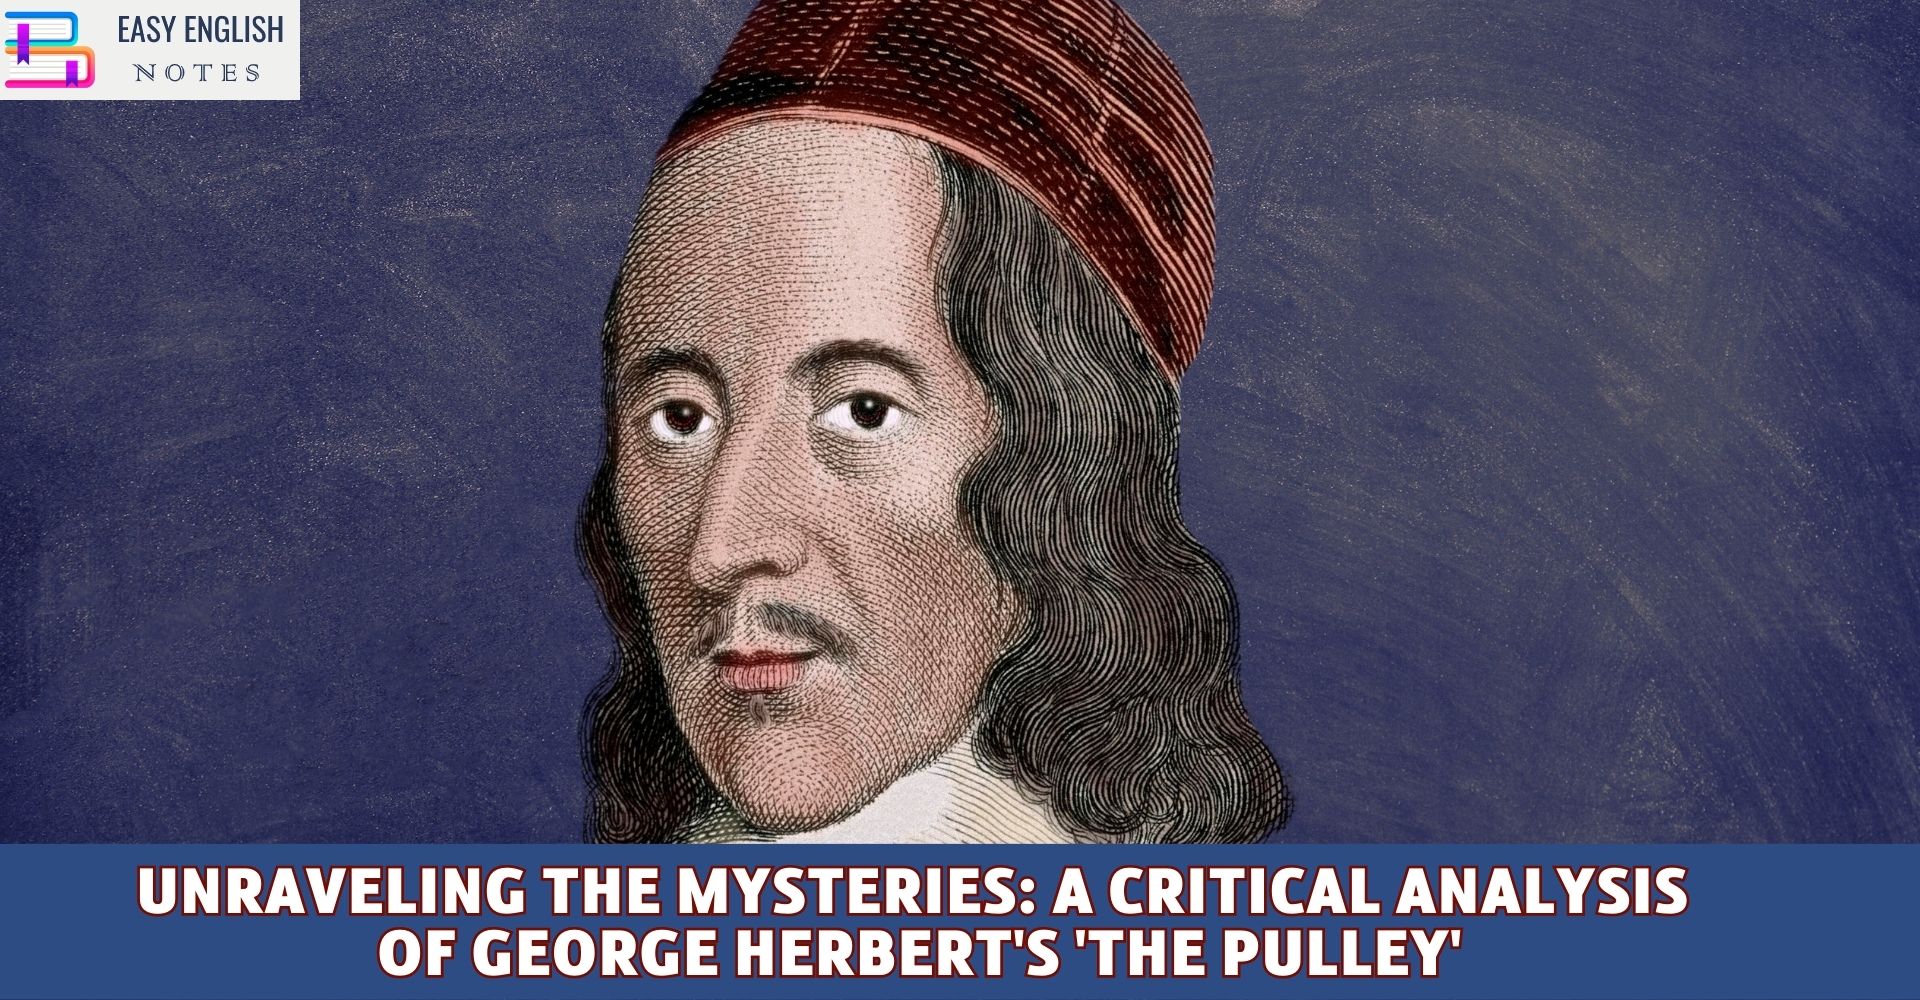 Unraveling the Mysteries: A Critical Analysis of George Herbert's 'The Pulley'